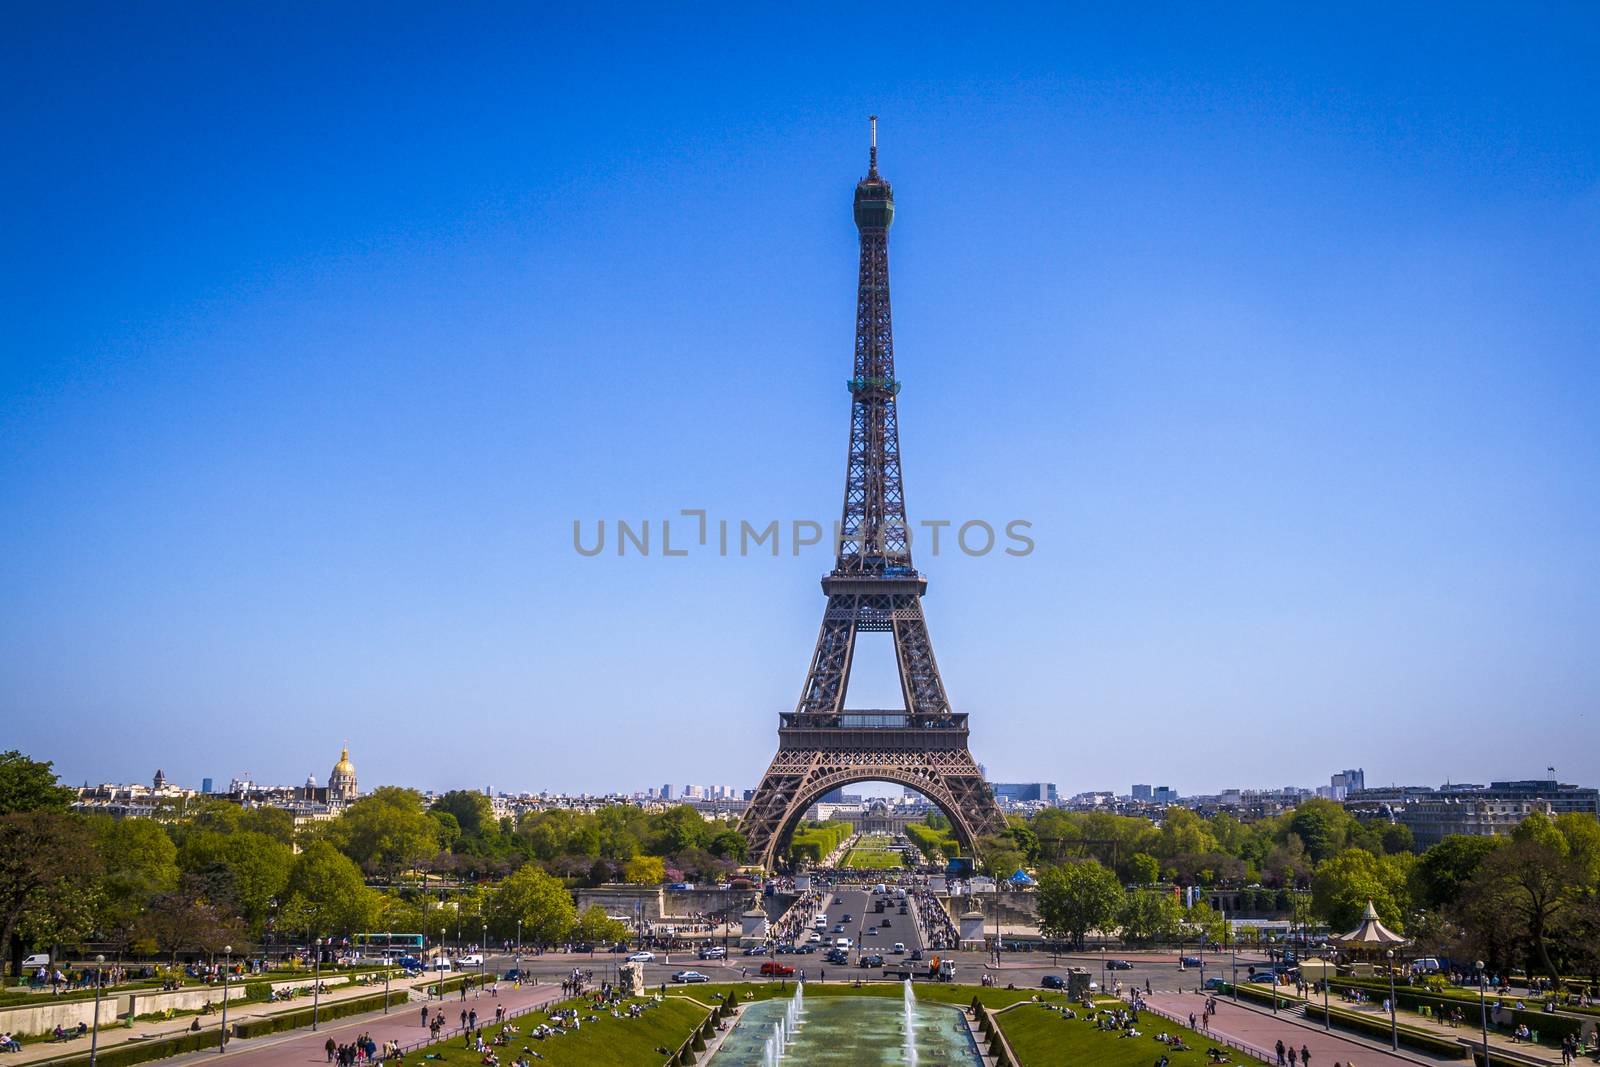 Eiffel Tower, the number one icon in Paris, France.